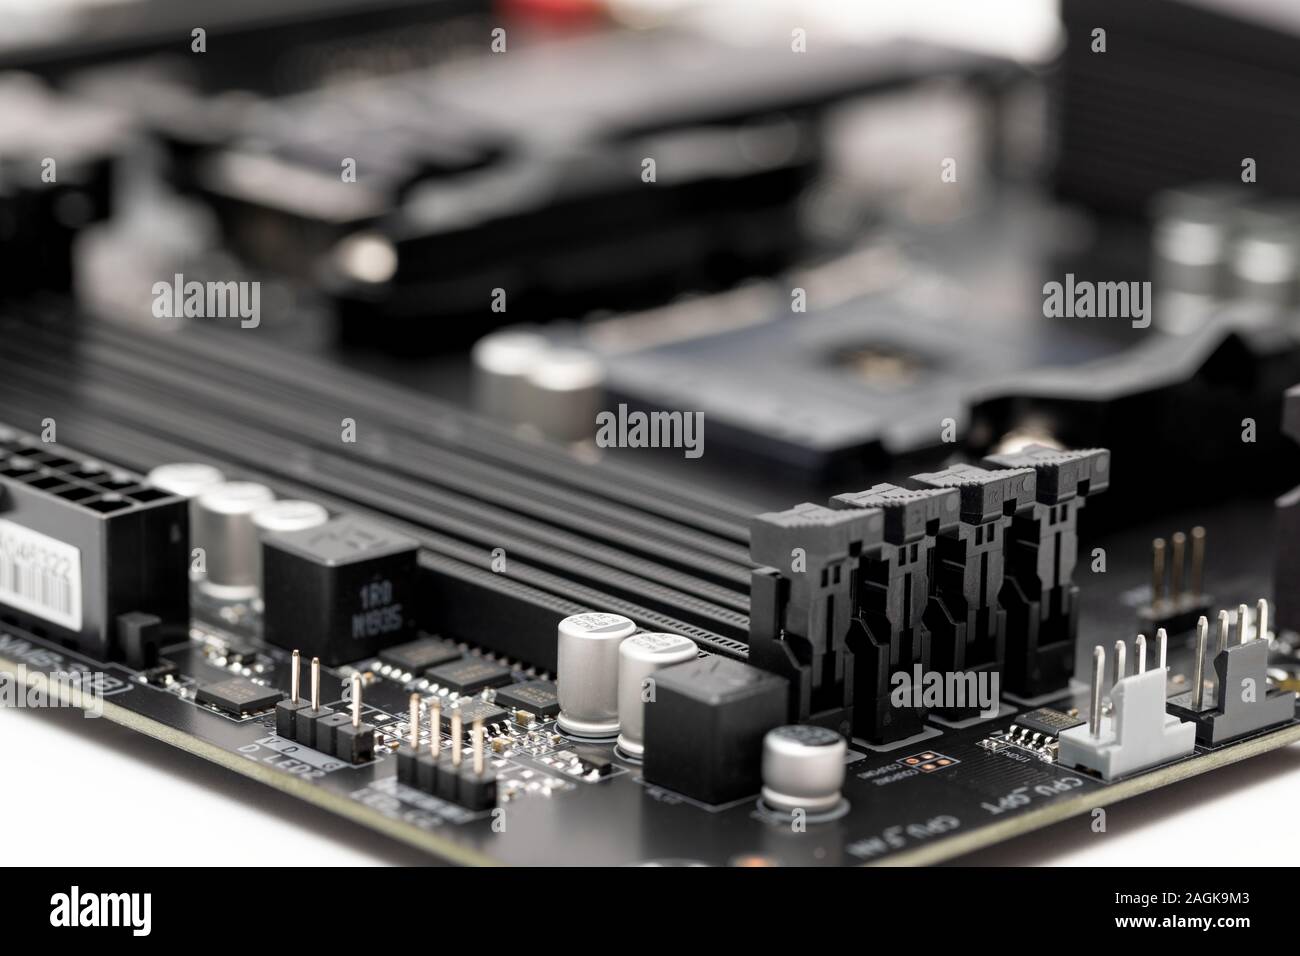 Cose up picture of a brand new computer motherboard Stock Photo